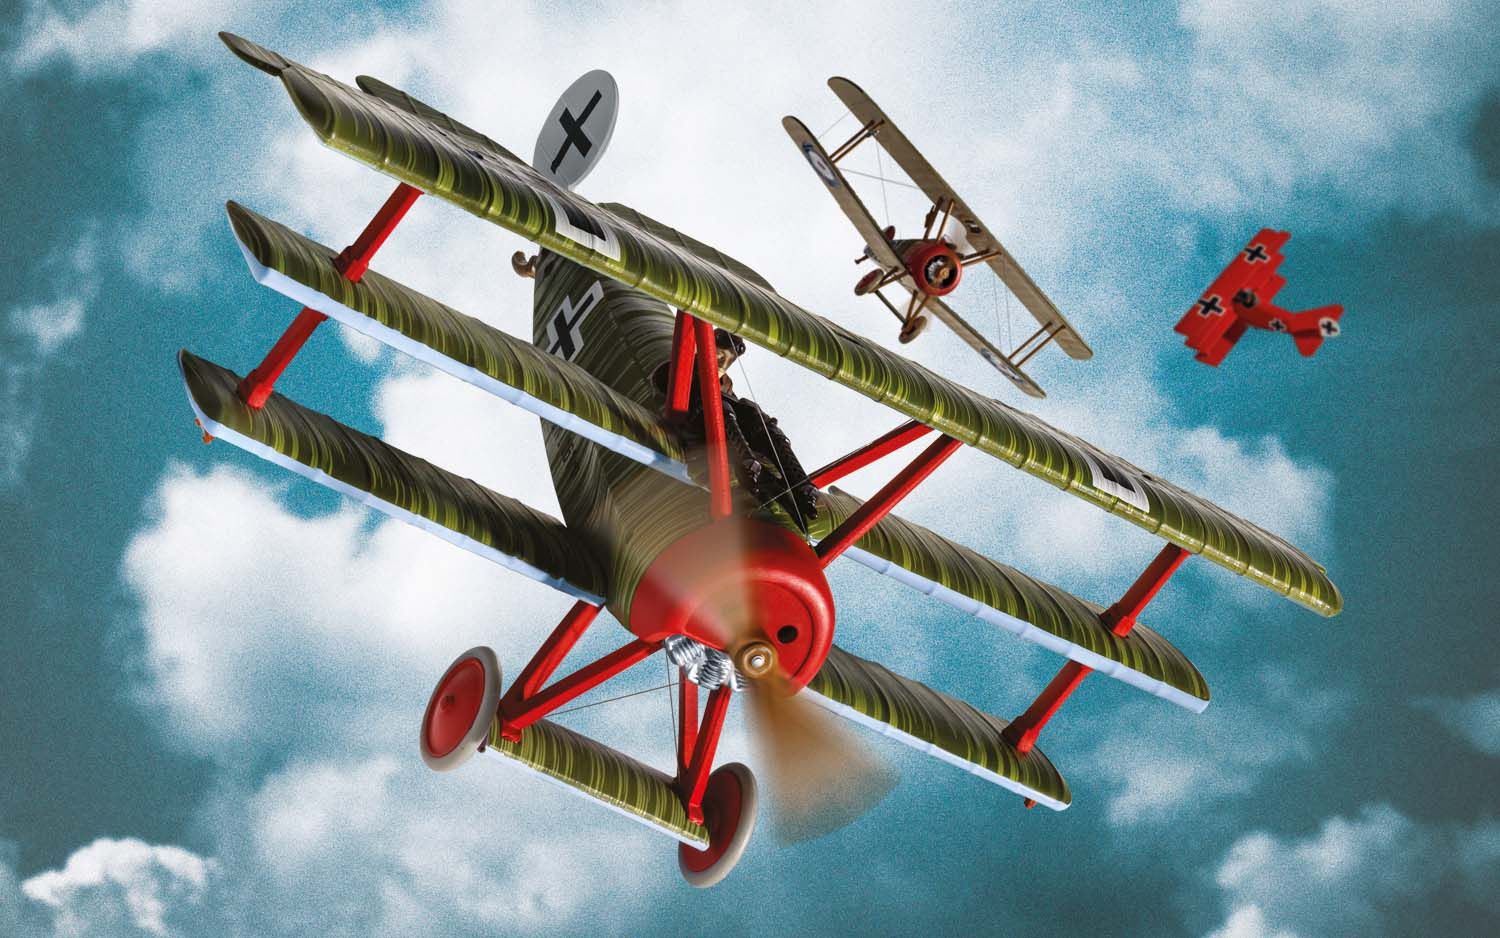 Meet the Fokker . . . and the Red Baron